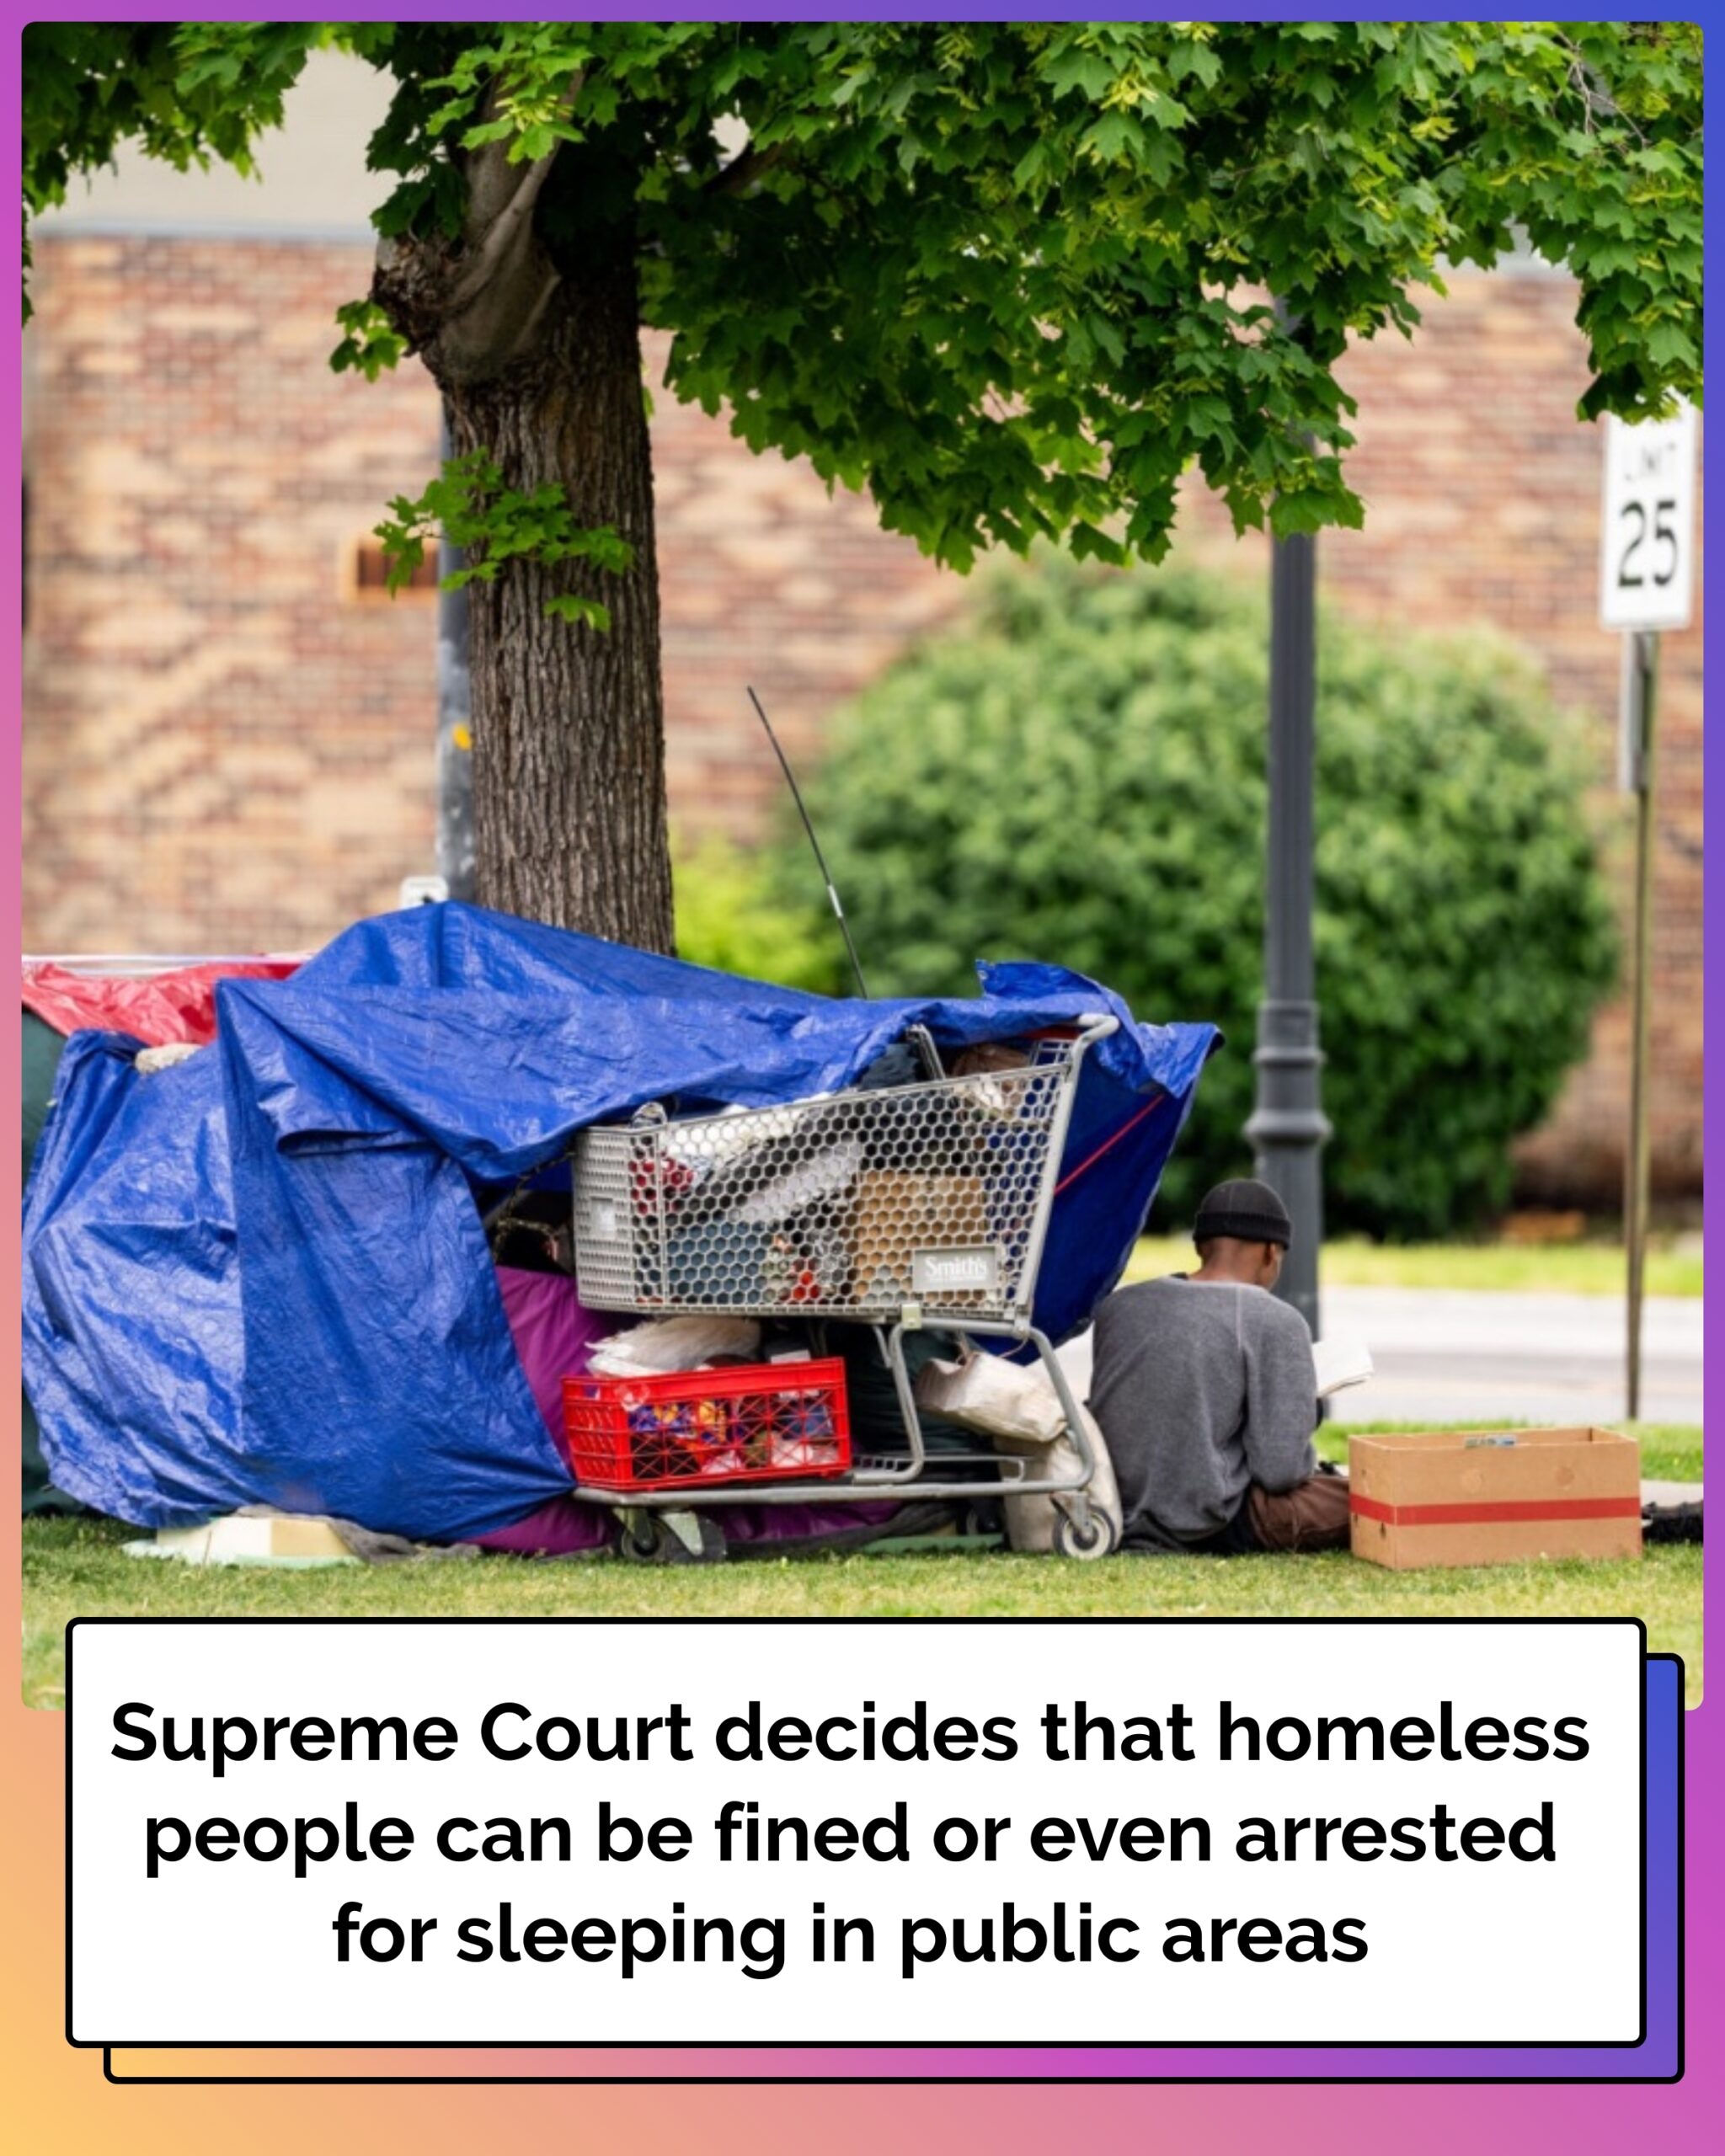 Supreme Court Allows Arrest or Fines on Homeless for Sleeping in Public Spaces